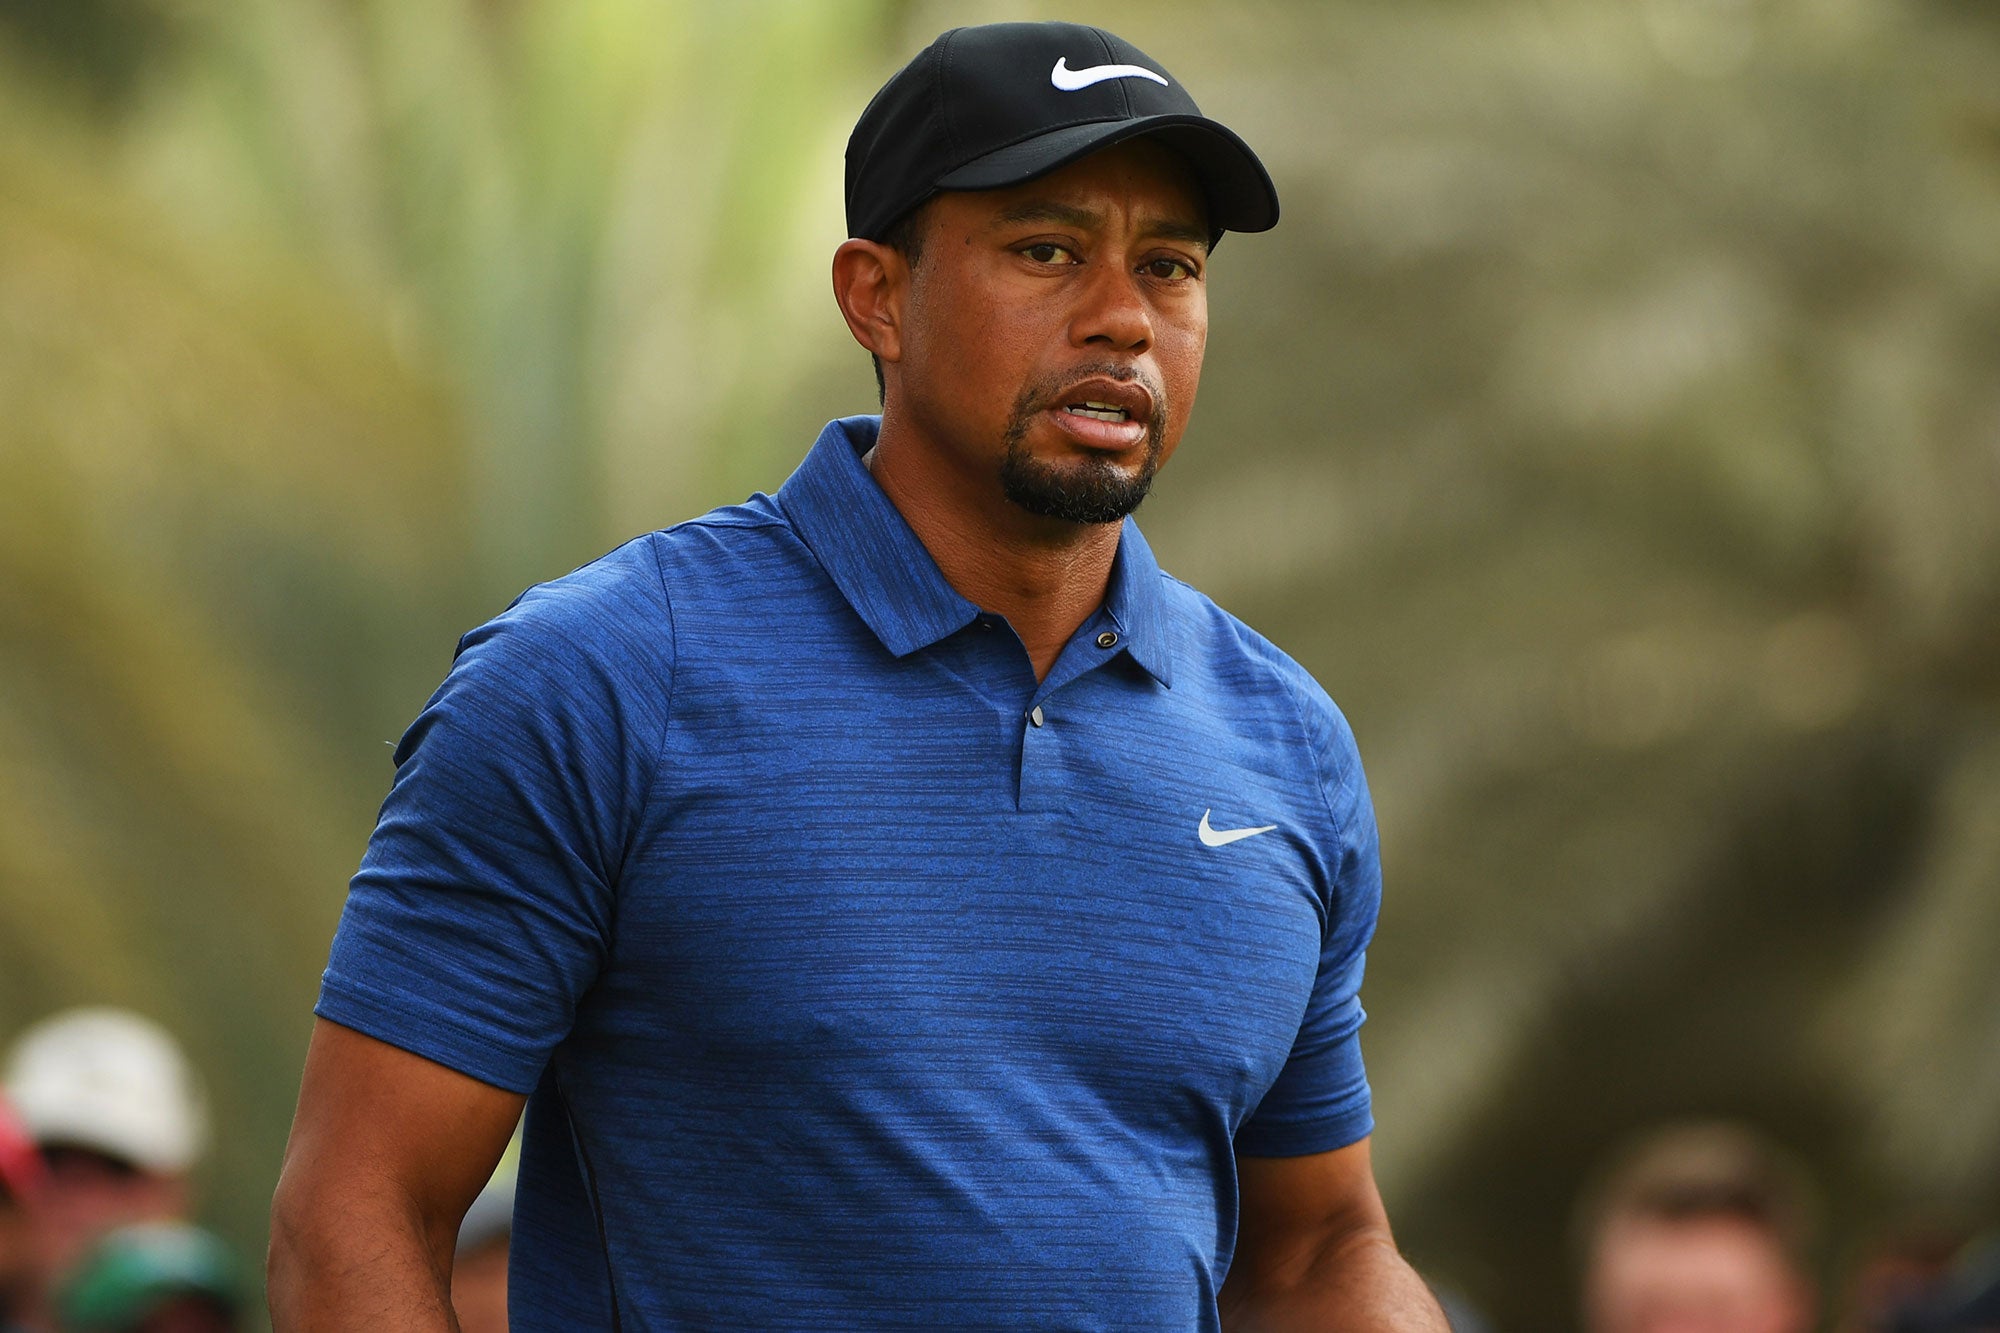 Tiger Woods Says He Had ‘Unexpected Reaction’ to Medication and Was Not Drunk During DIU Arrest